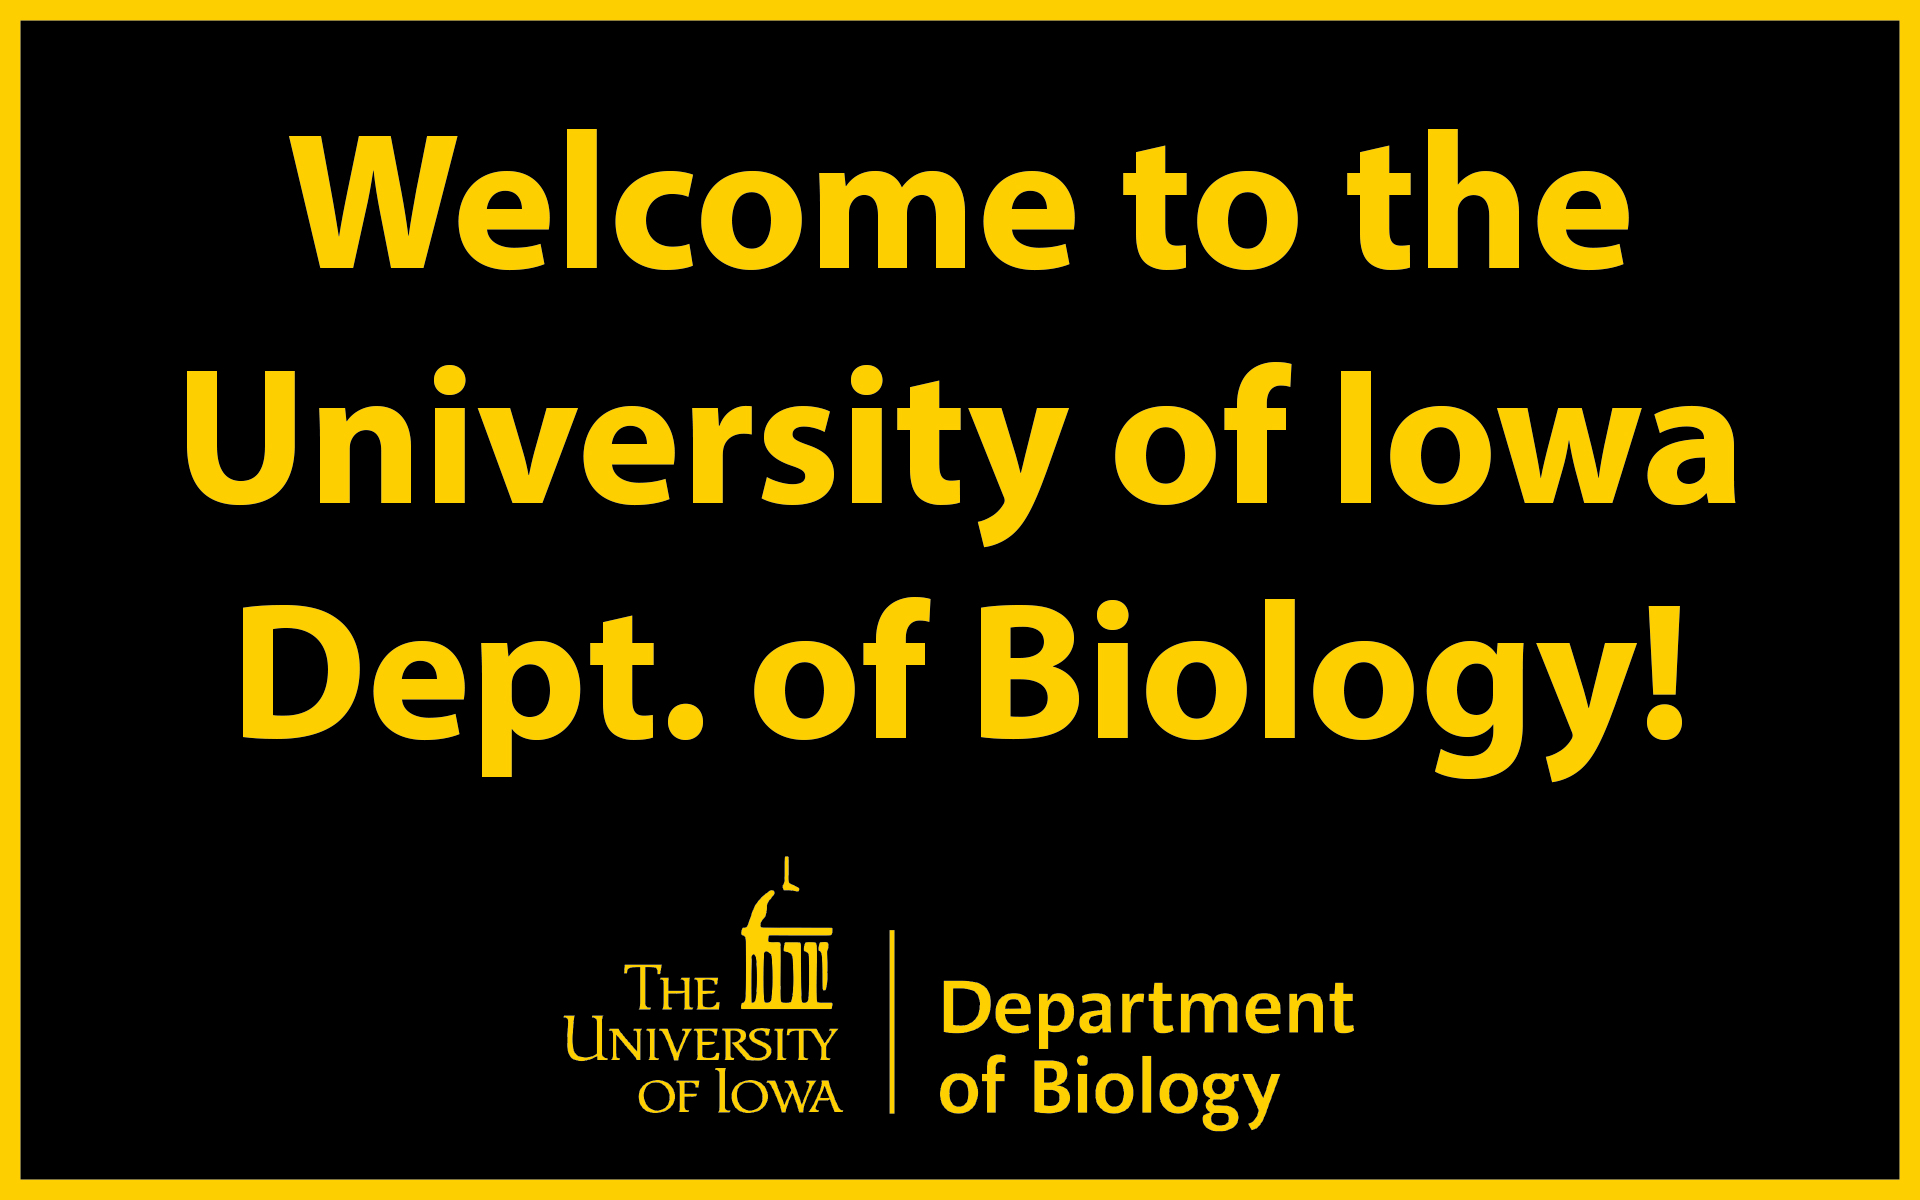 Welcome to the University of Iowa Dept. of Biology!